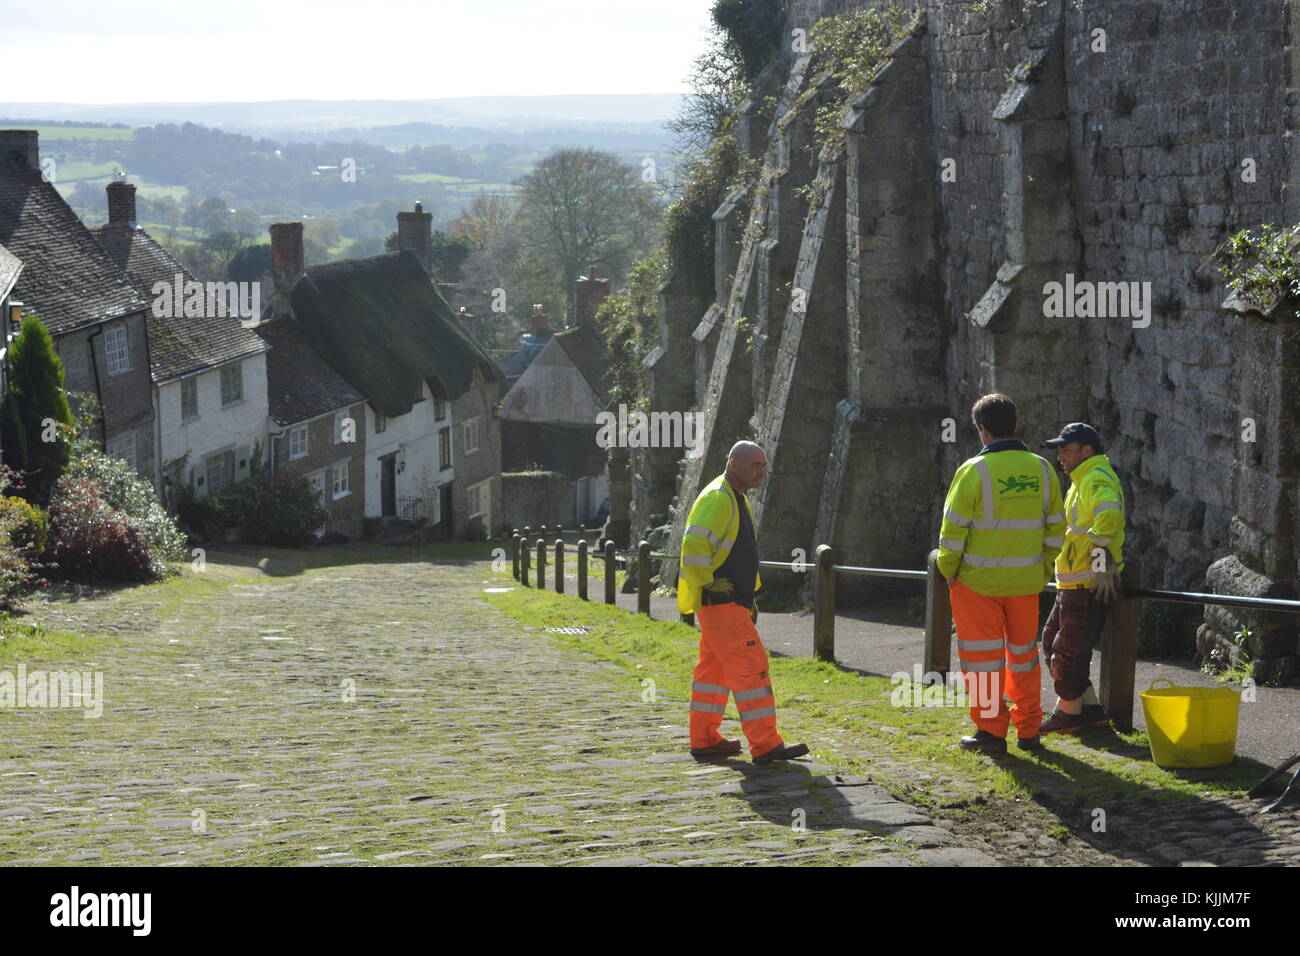 Three workmen discussing clearing the grass from the cobblestones of Shaftesbury Gold Hill, Dorset, England Stock Photo